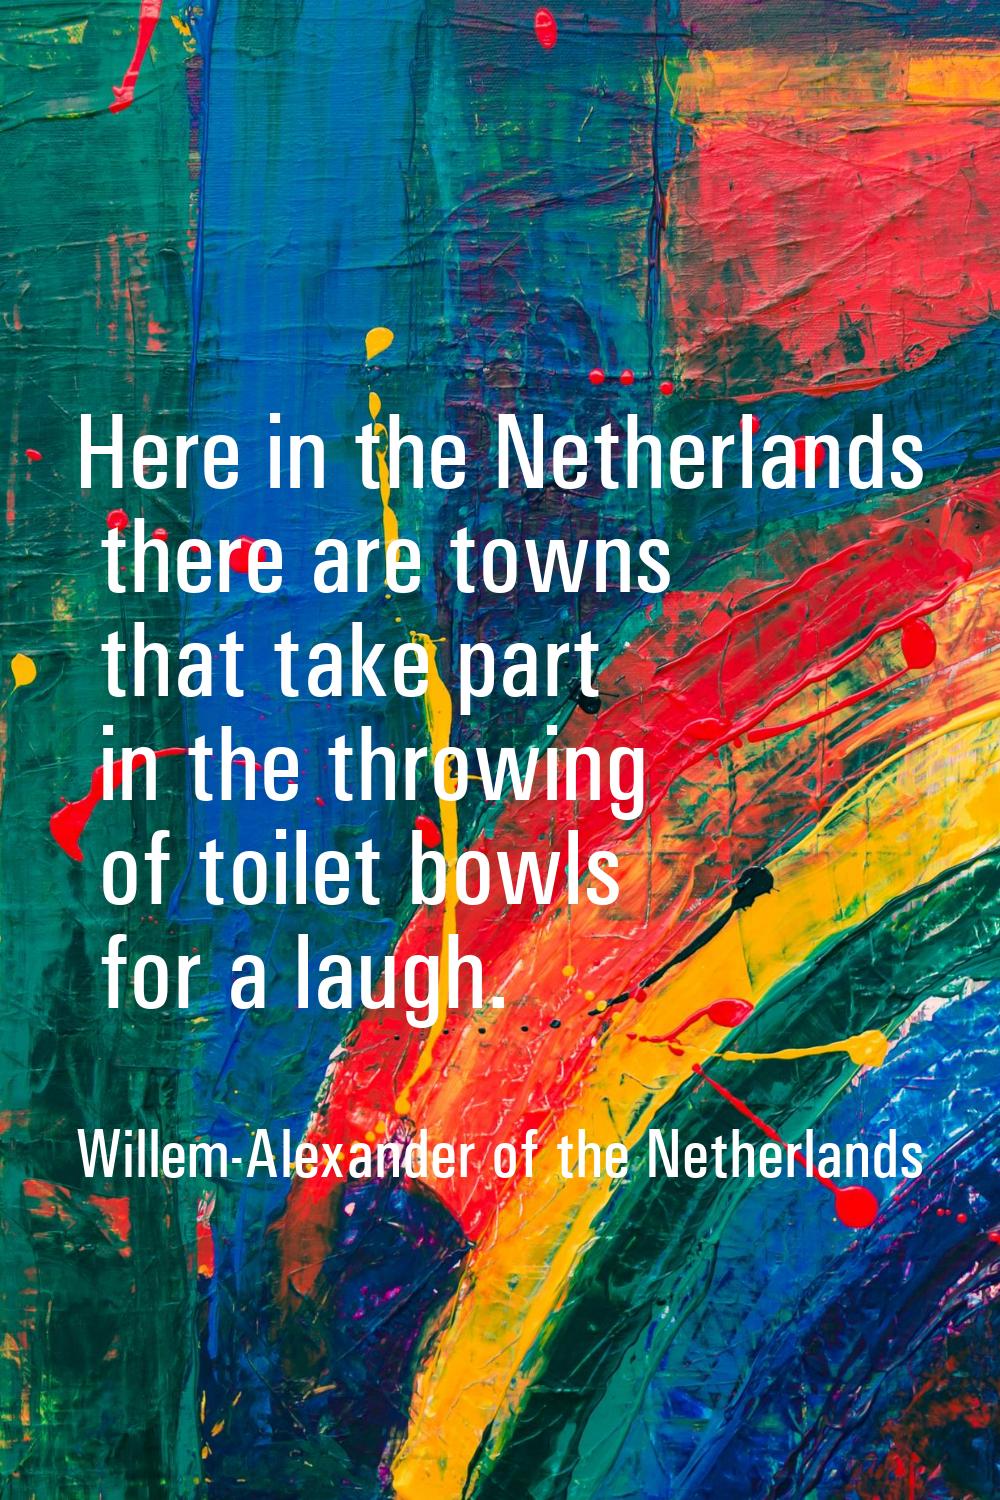 Here in the Netherlands there are towns that take part in the throwing of toilet bowls for a laugh.